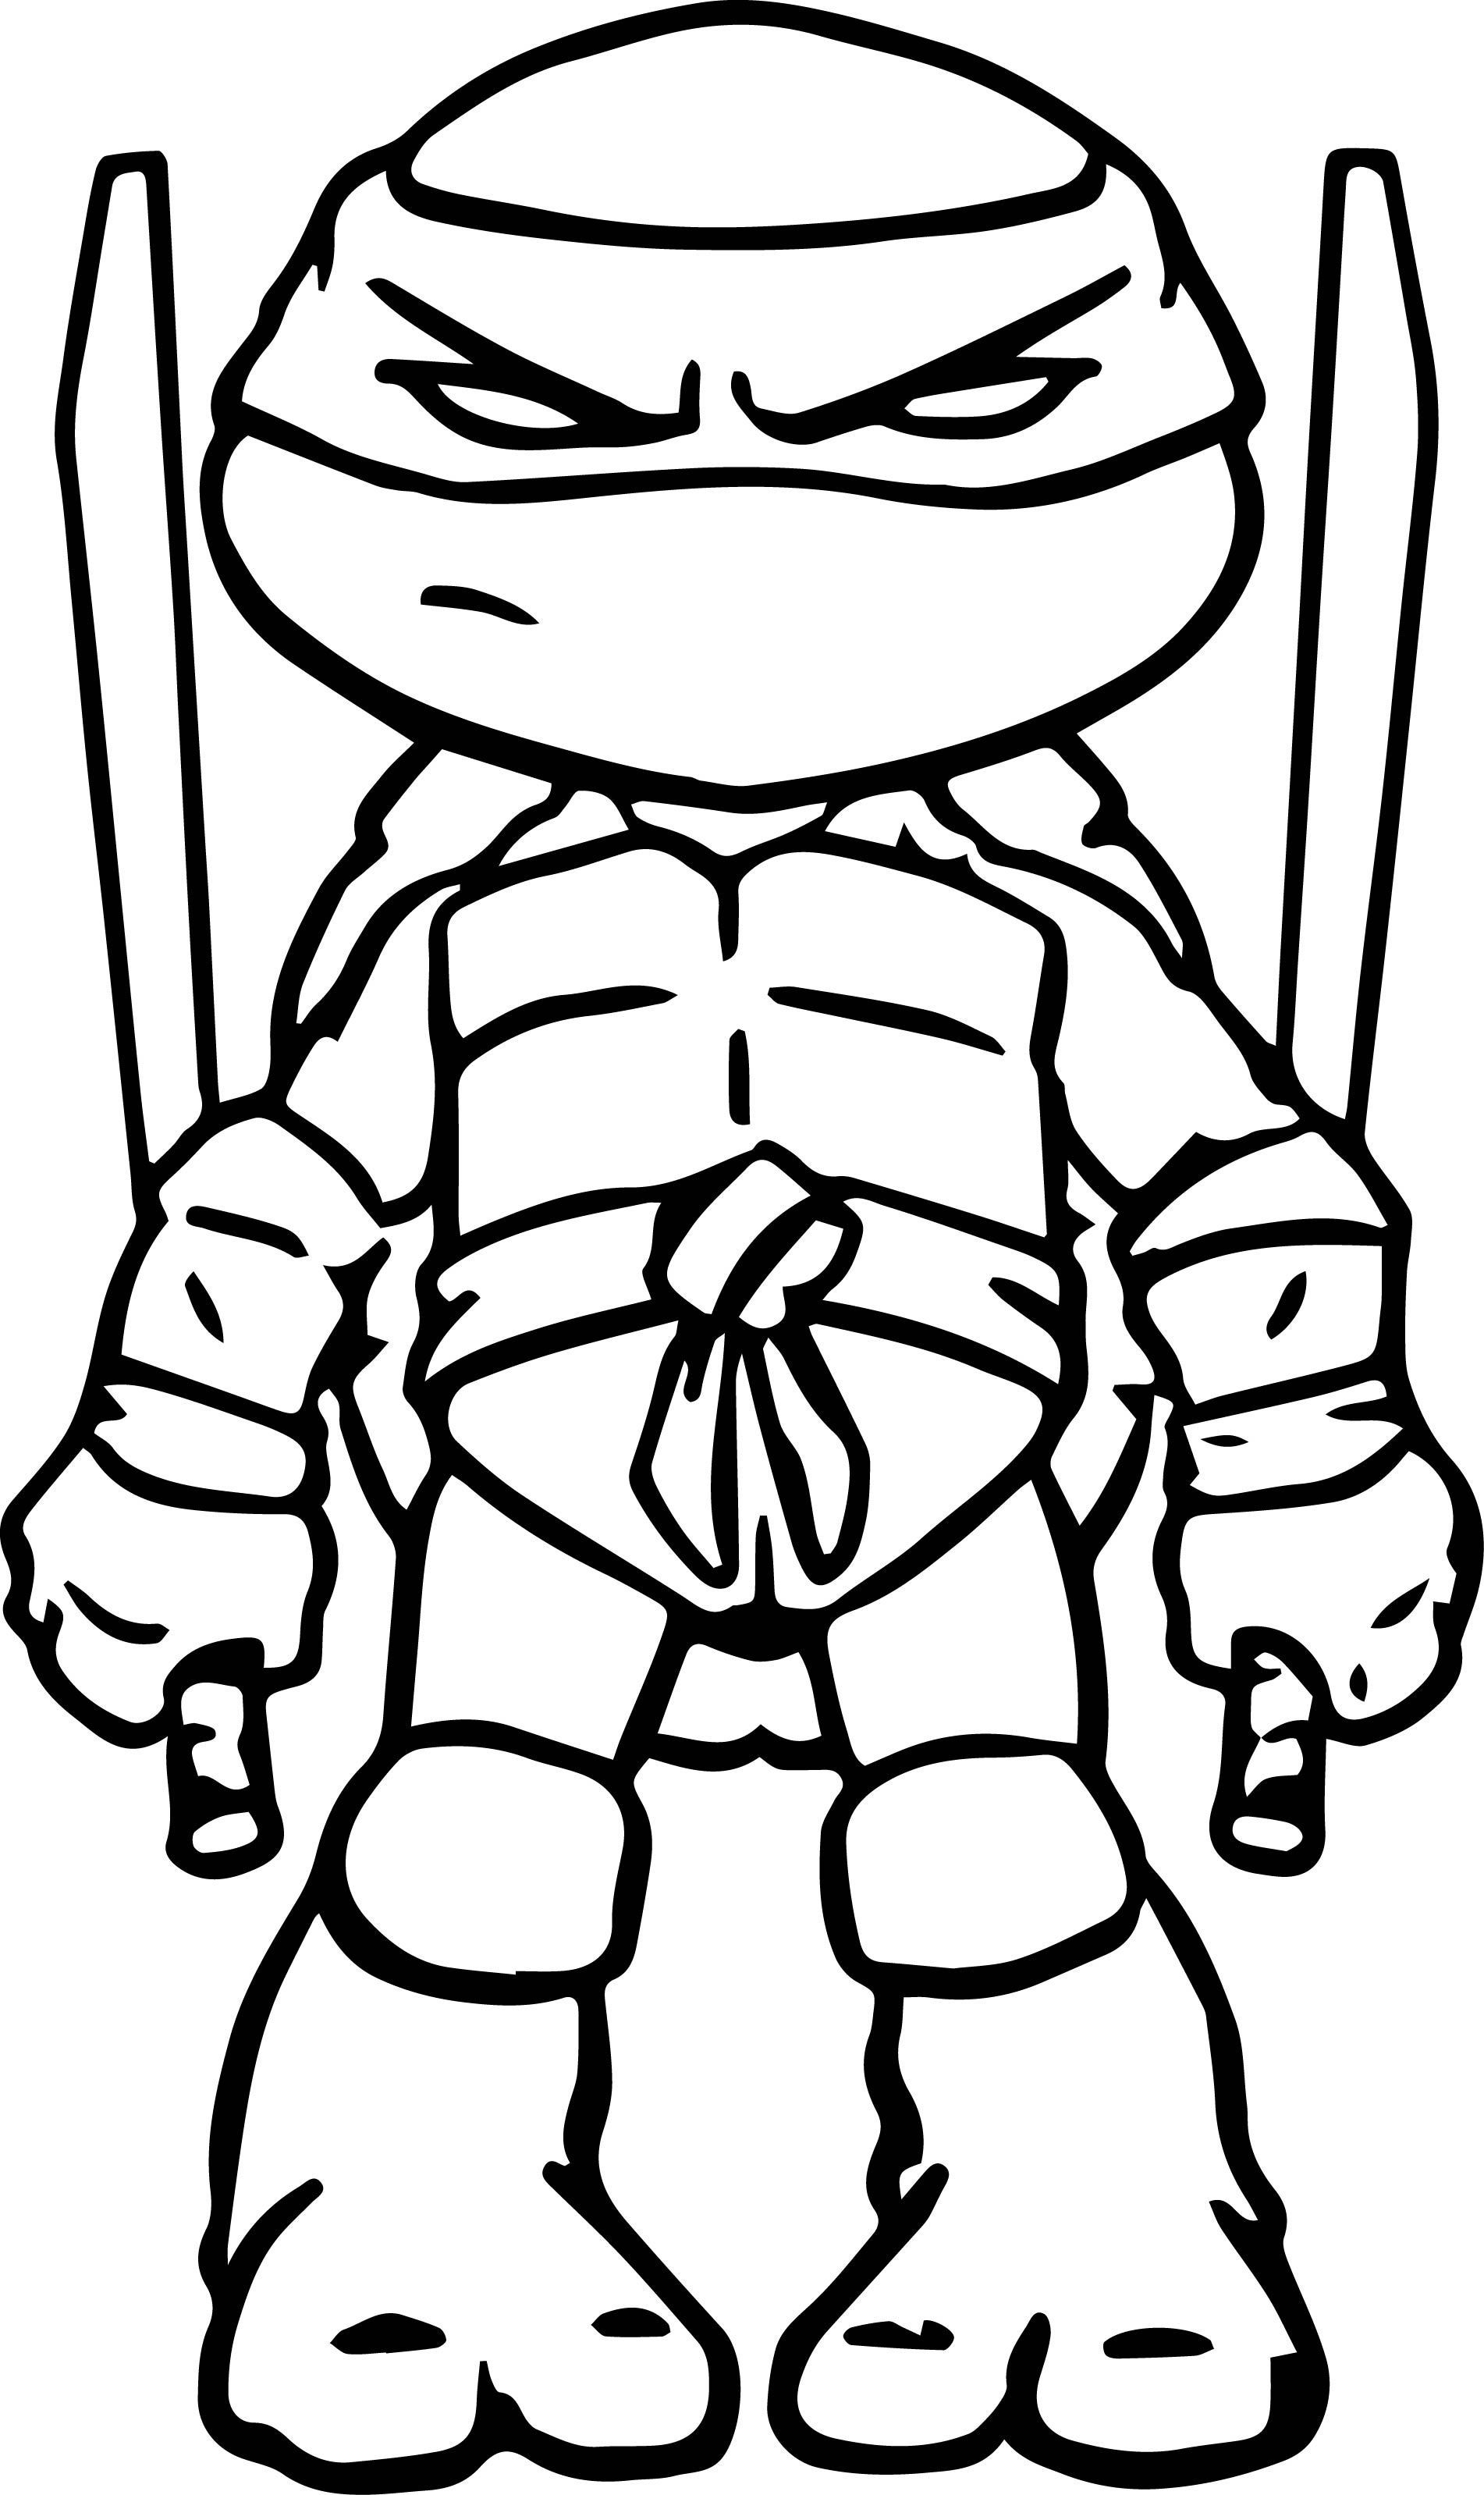 Ninja Turtles Coloring Pages | Free Coloring Pages